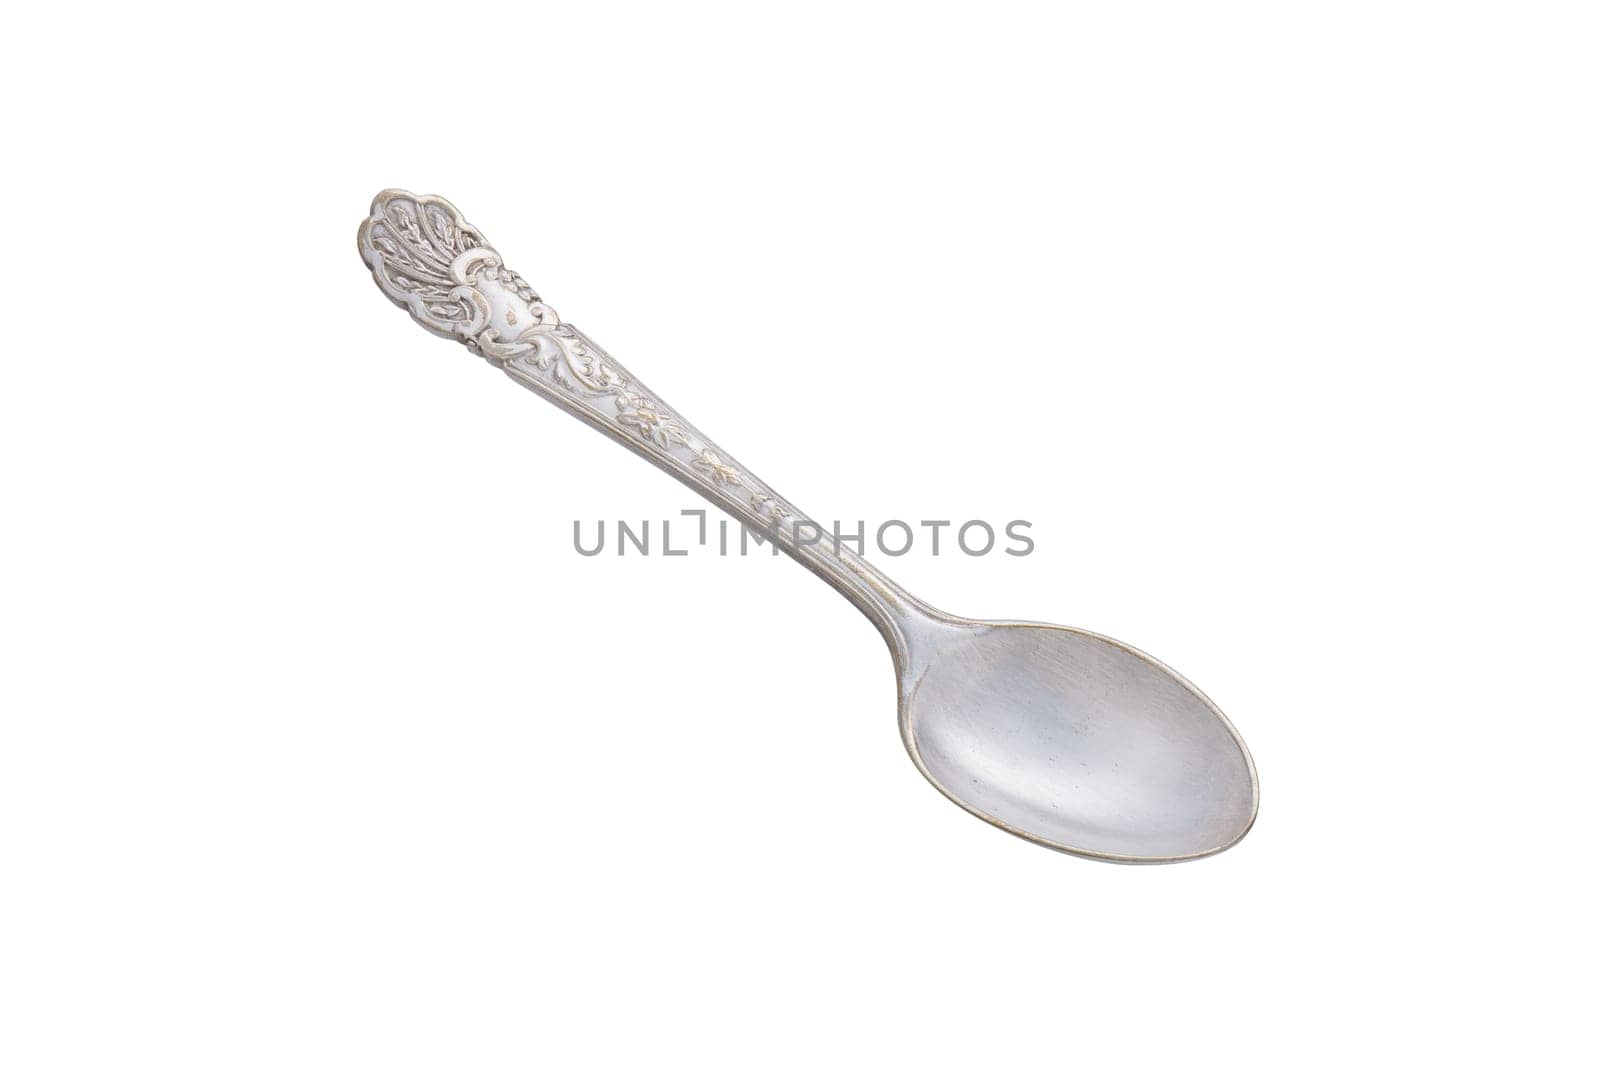 Metal dessert spoon, cut out, photo stacking